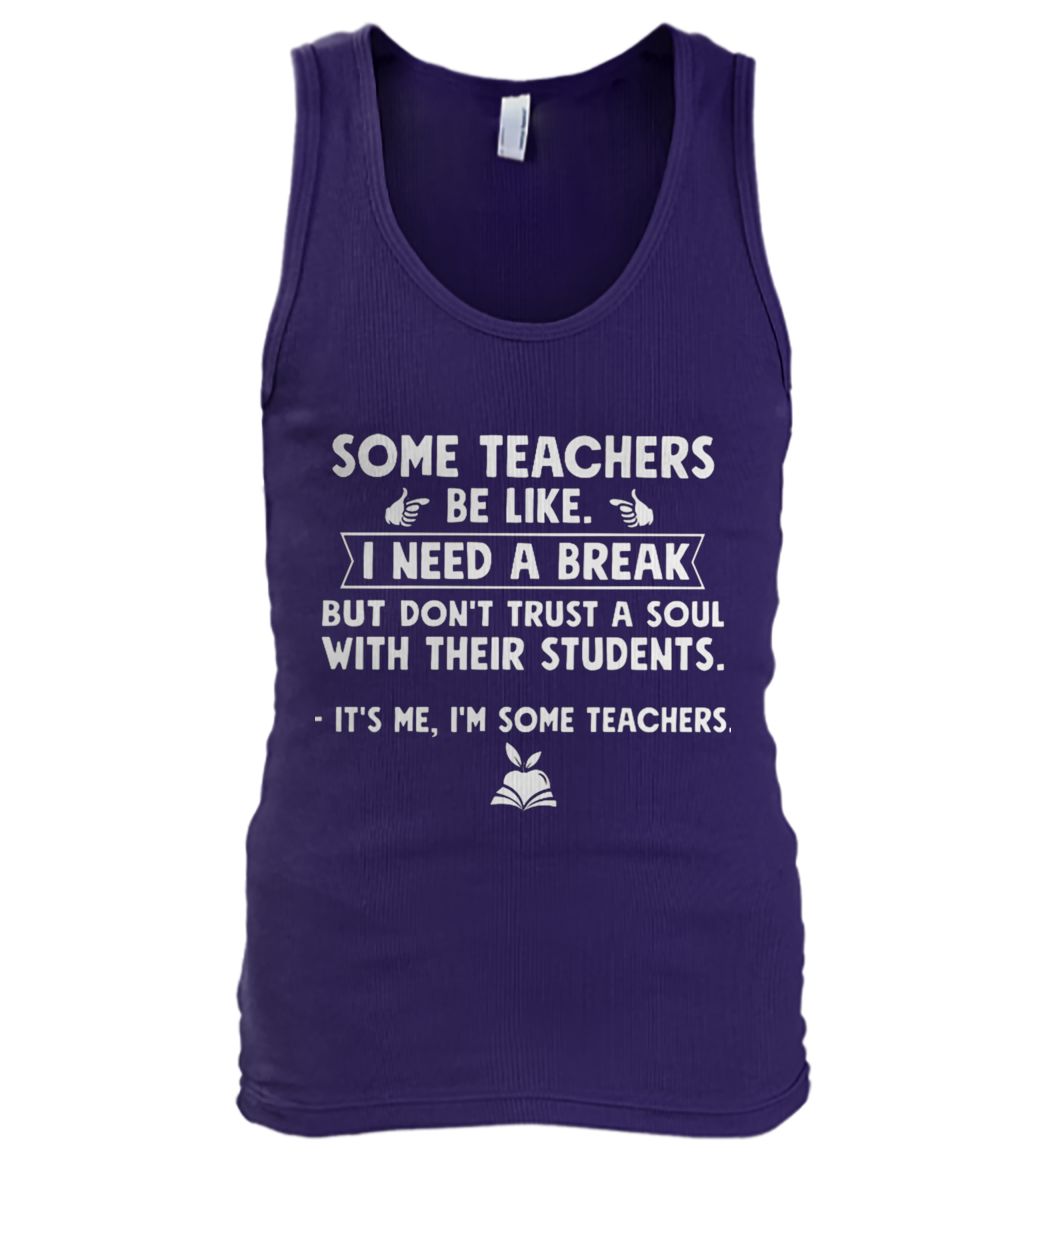 Some teachers be like I need a break but don't trust a soul with their students men's tank top